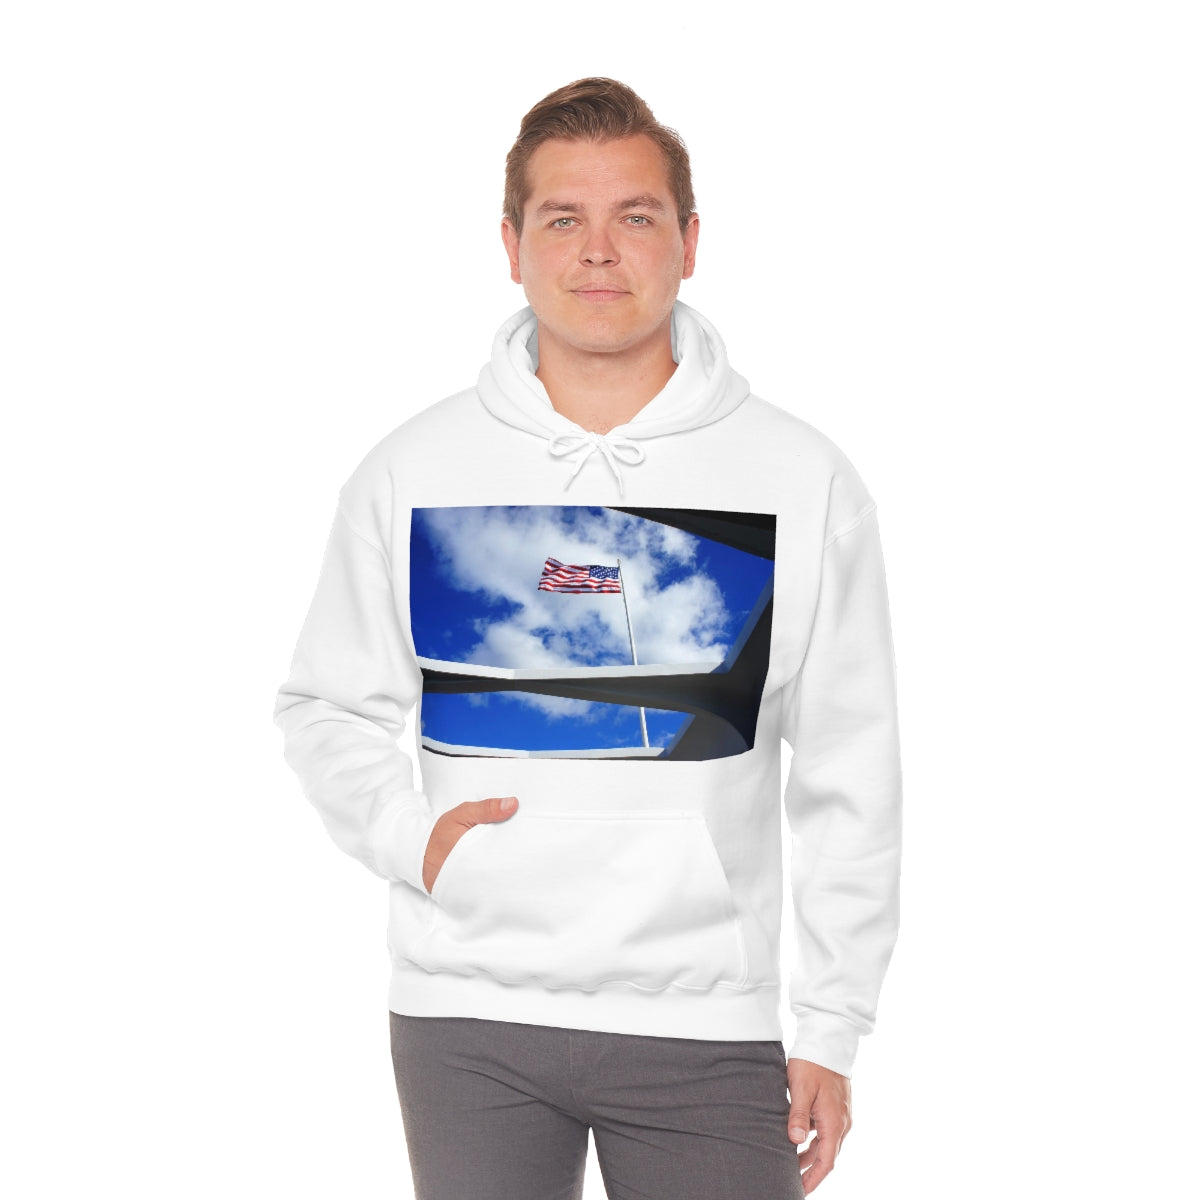 Bravery Honored Forever - Unisex Heavy Blend Hooded Sweatshirt - Fry1Productions